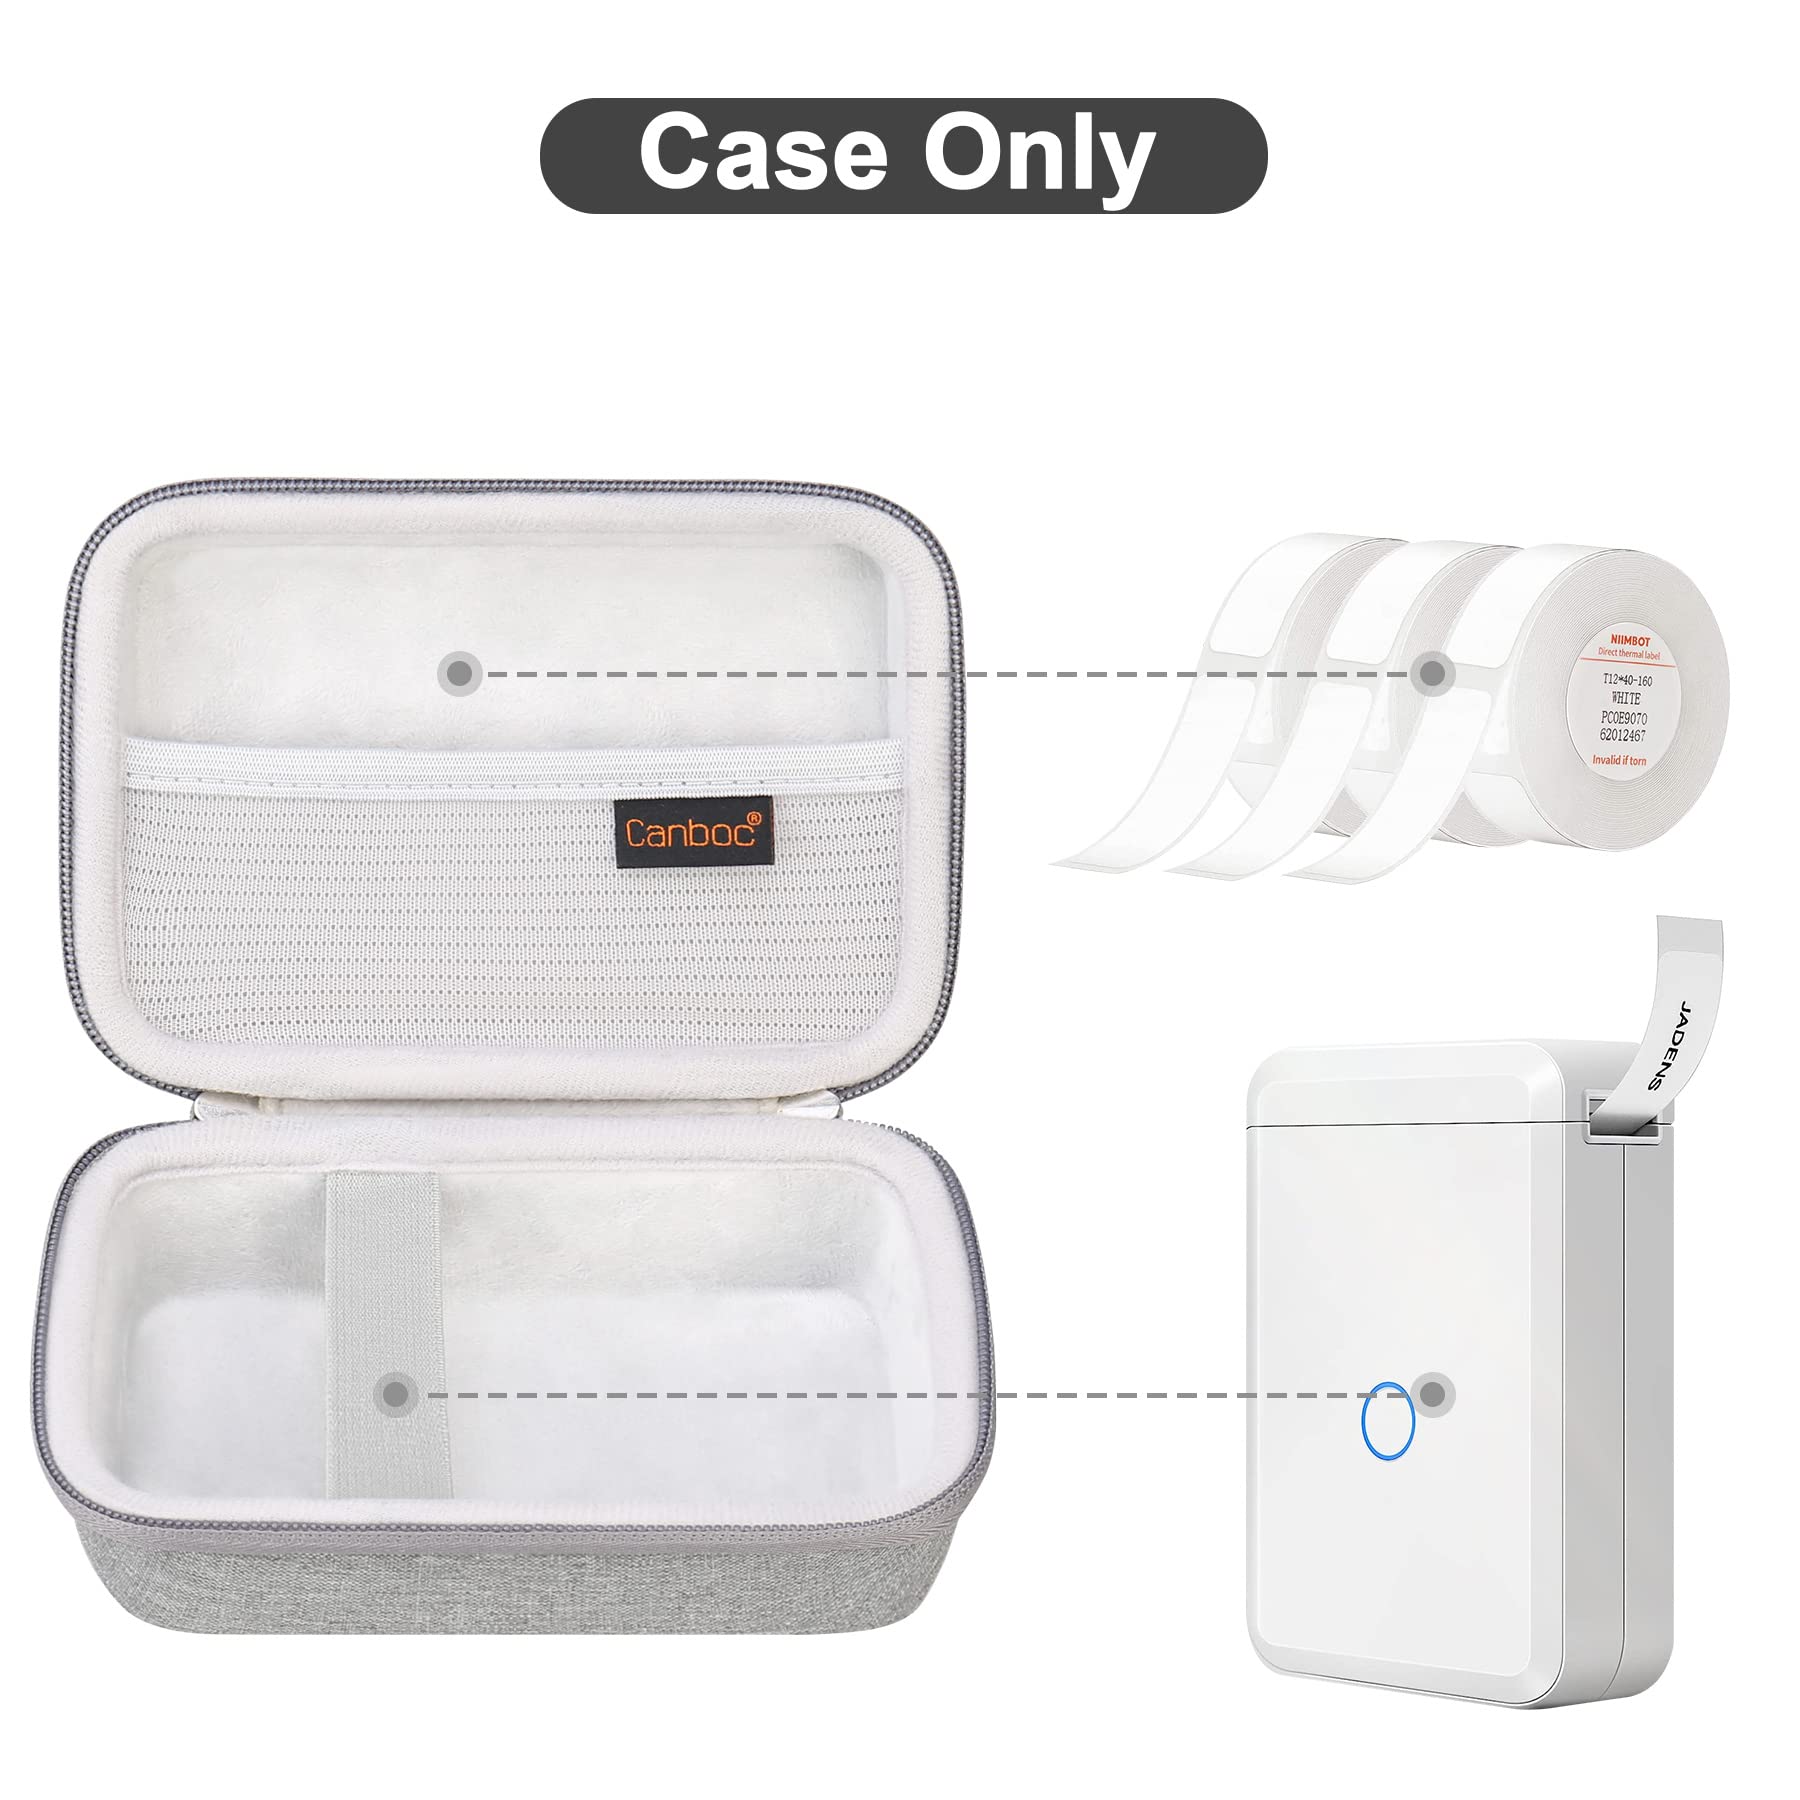 Canboc Hard Travel Case for Portable Nebulizer Machine for Adults